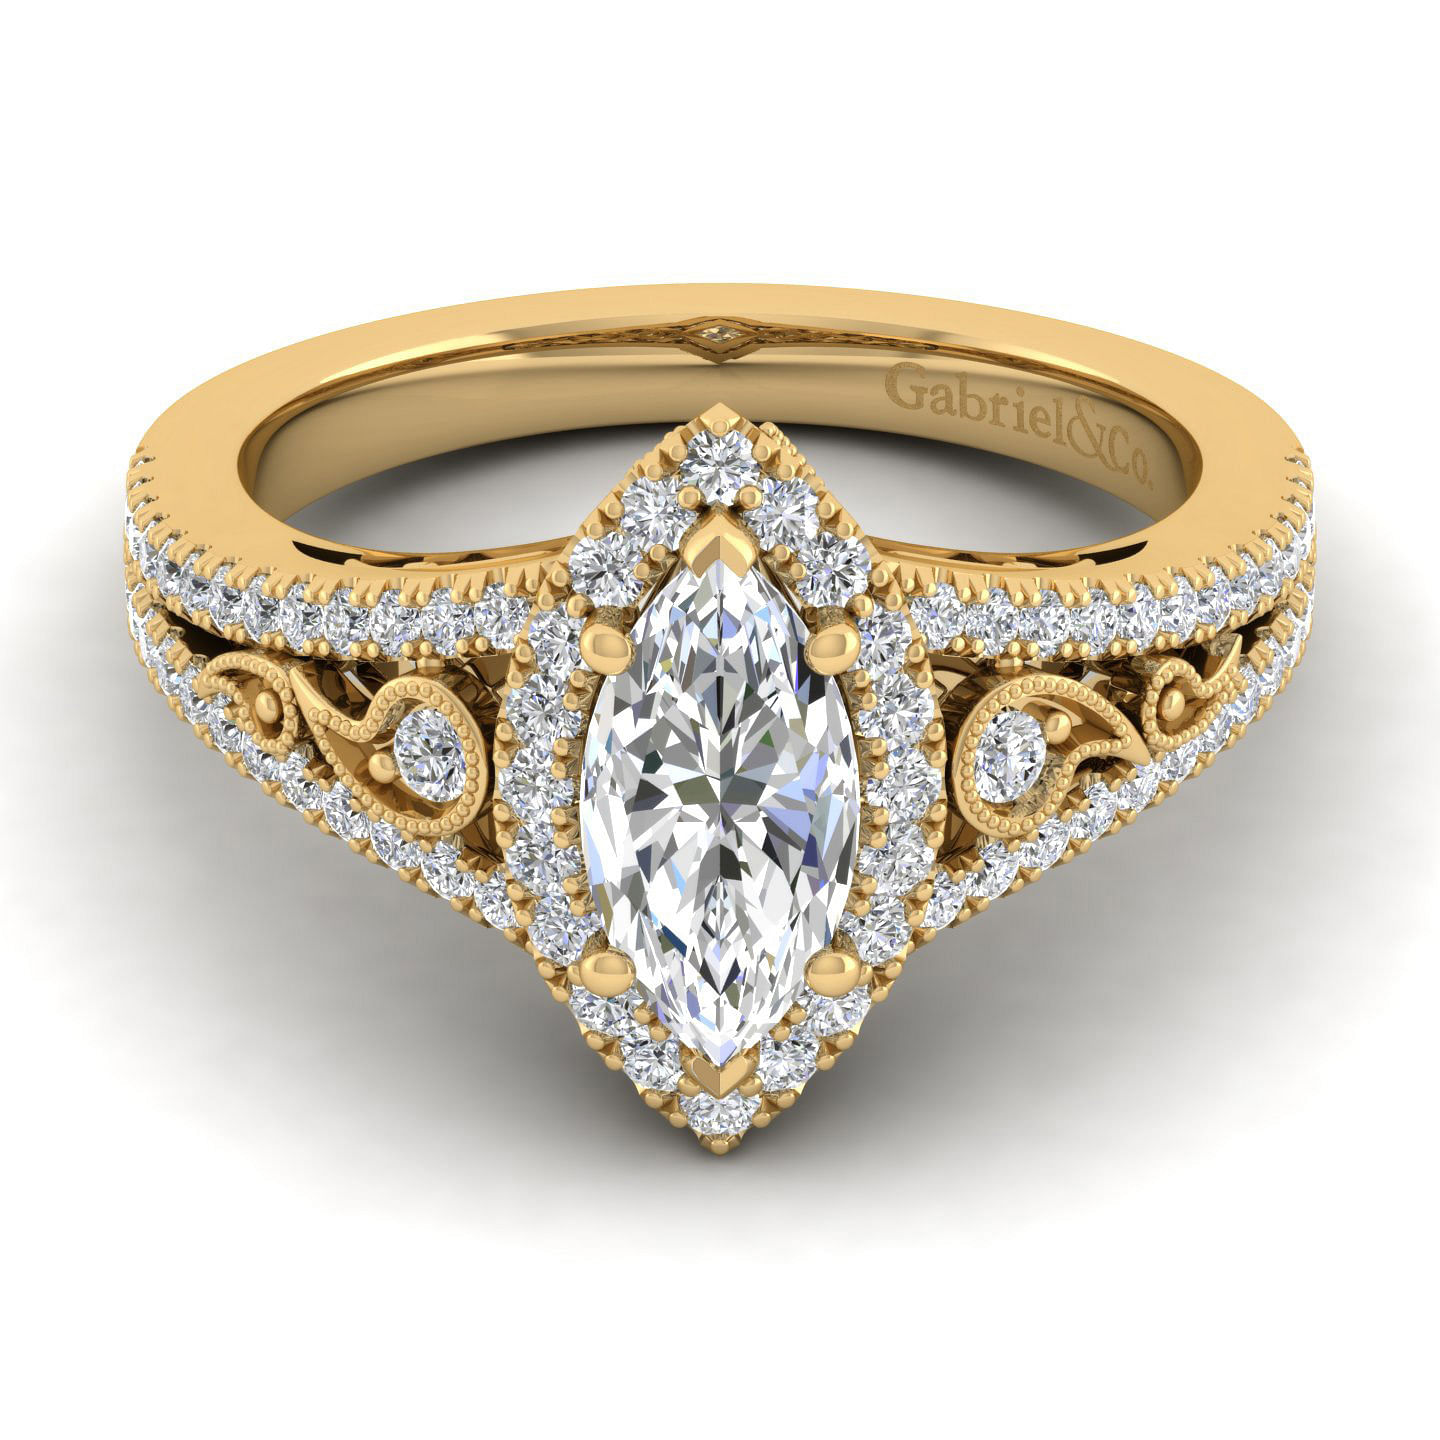 Vintage Inspired 14K Yellow Gold Marquise Halo Diamond Engagement Ring